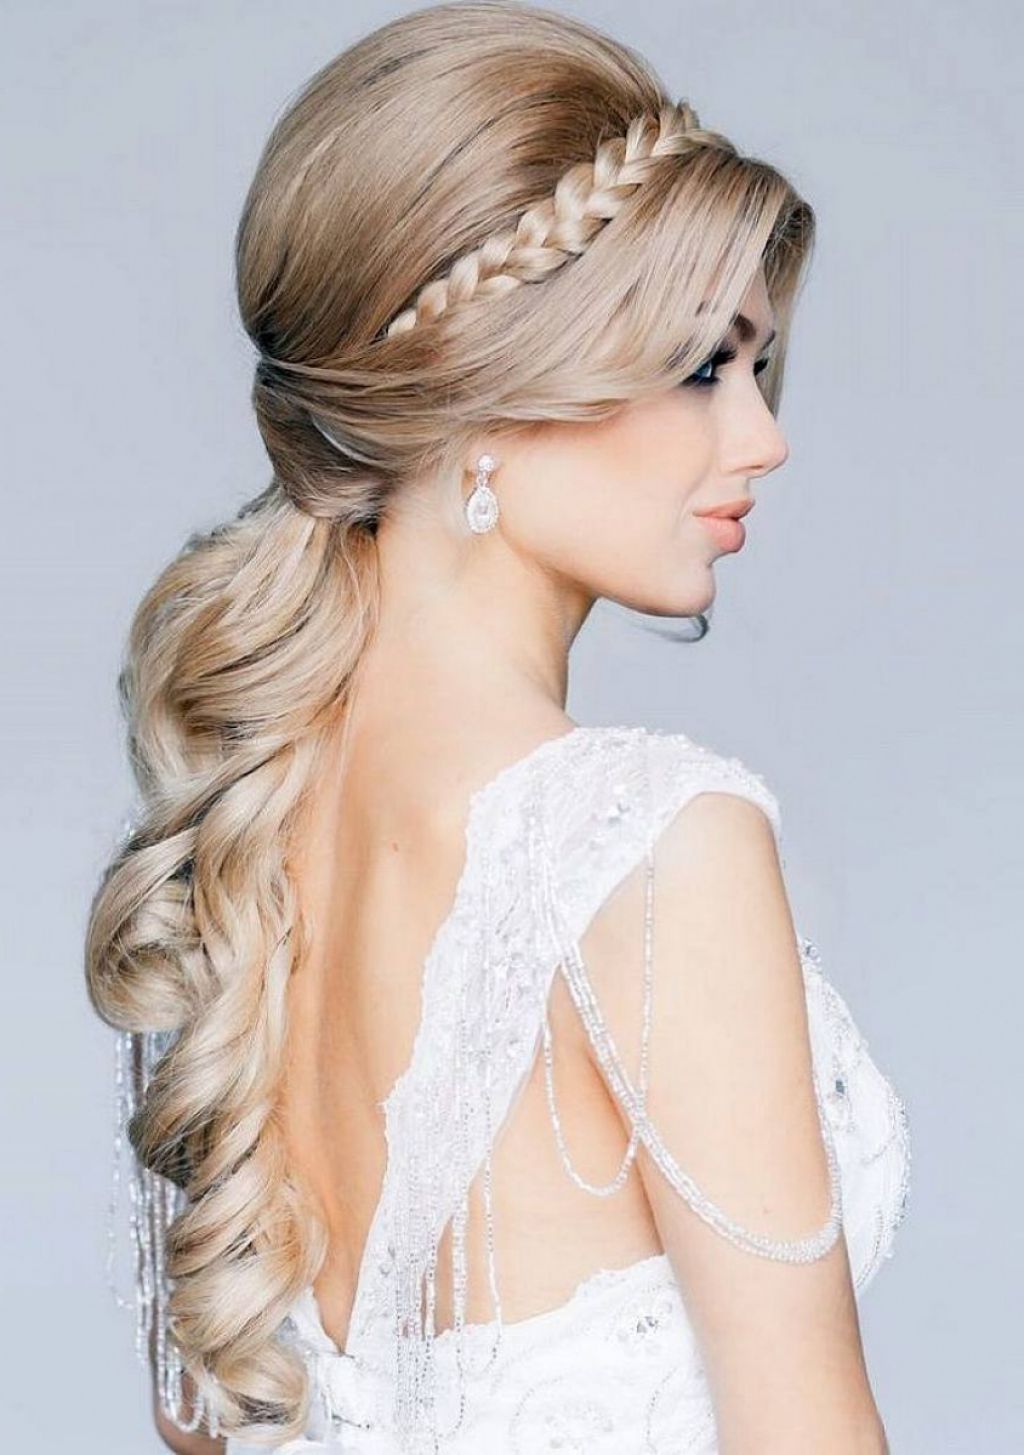 Most Popular Wedding Hairstyles For Long Hair With Braids Within √ 24+ Winning Braided Hairstyles For Long Hair: Hairstyles (View 1 of 15)